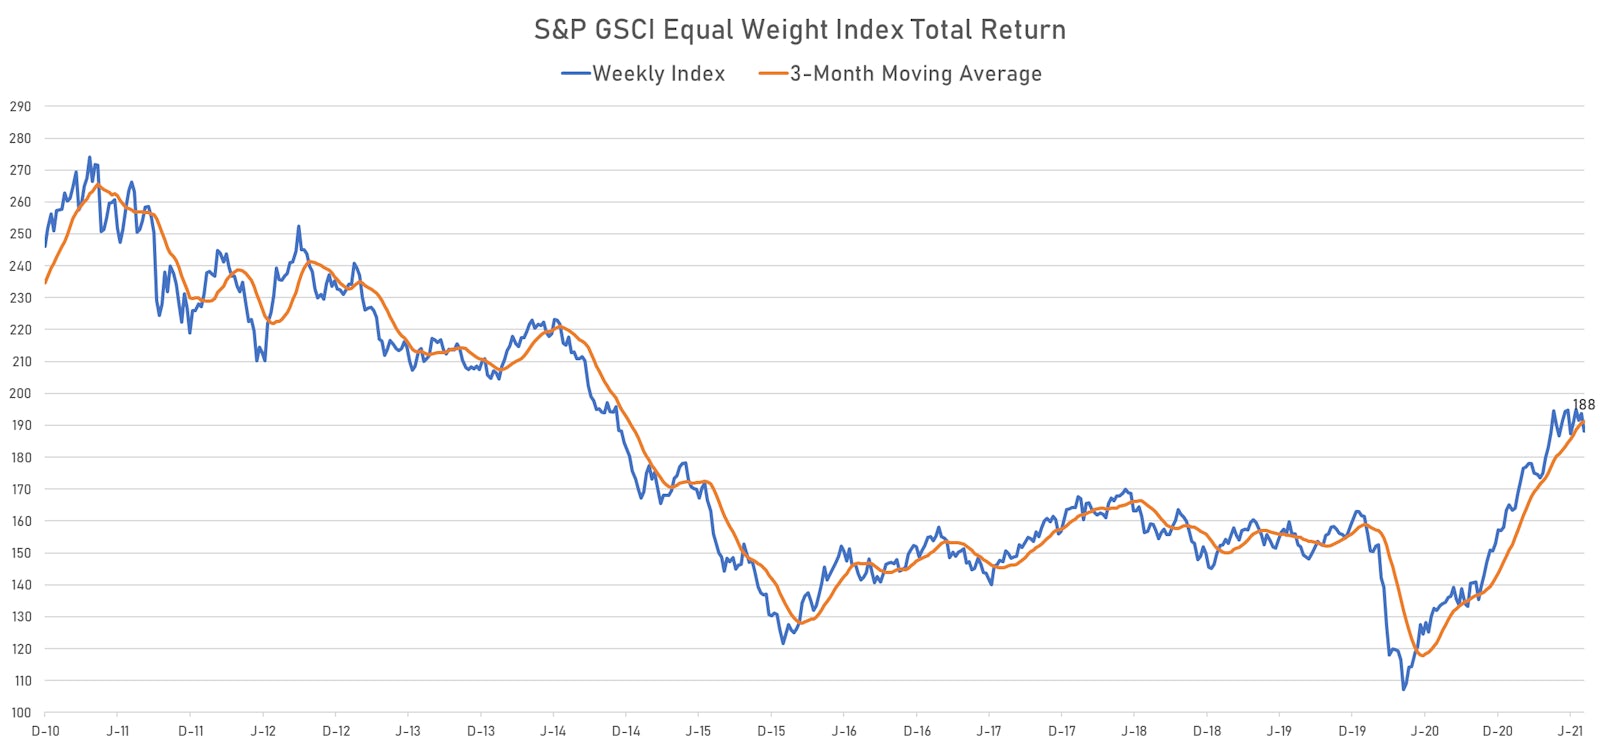 S&P GSCI Equal-Weighted Total Return Index | Sources: ϕpost, Refinitiv data